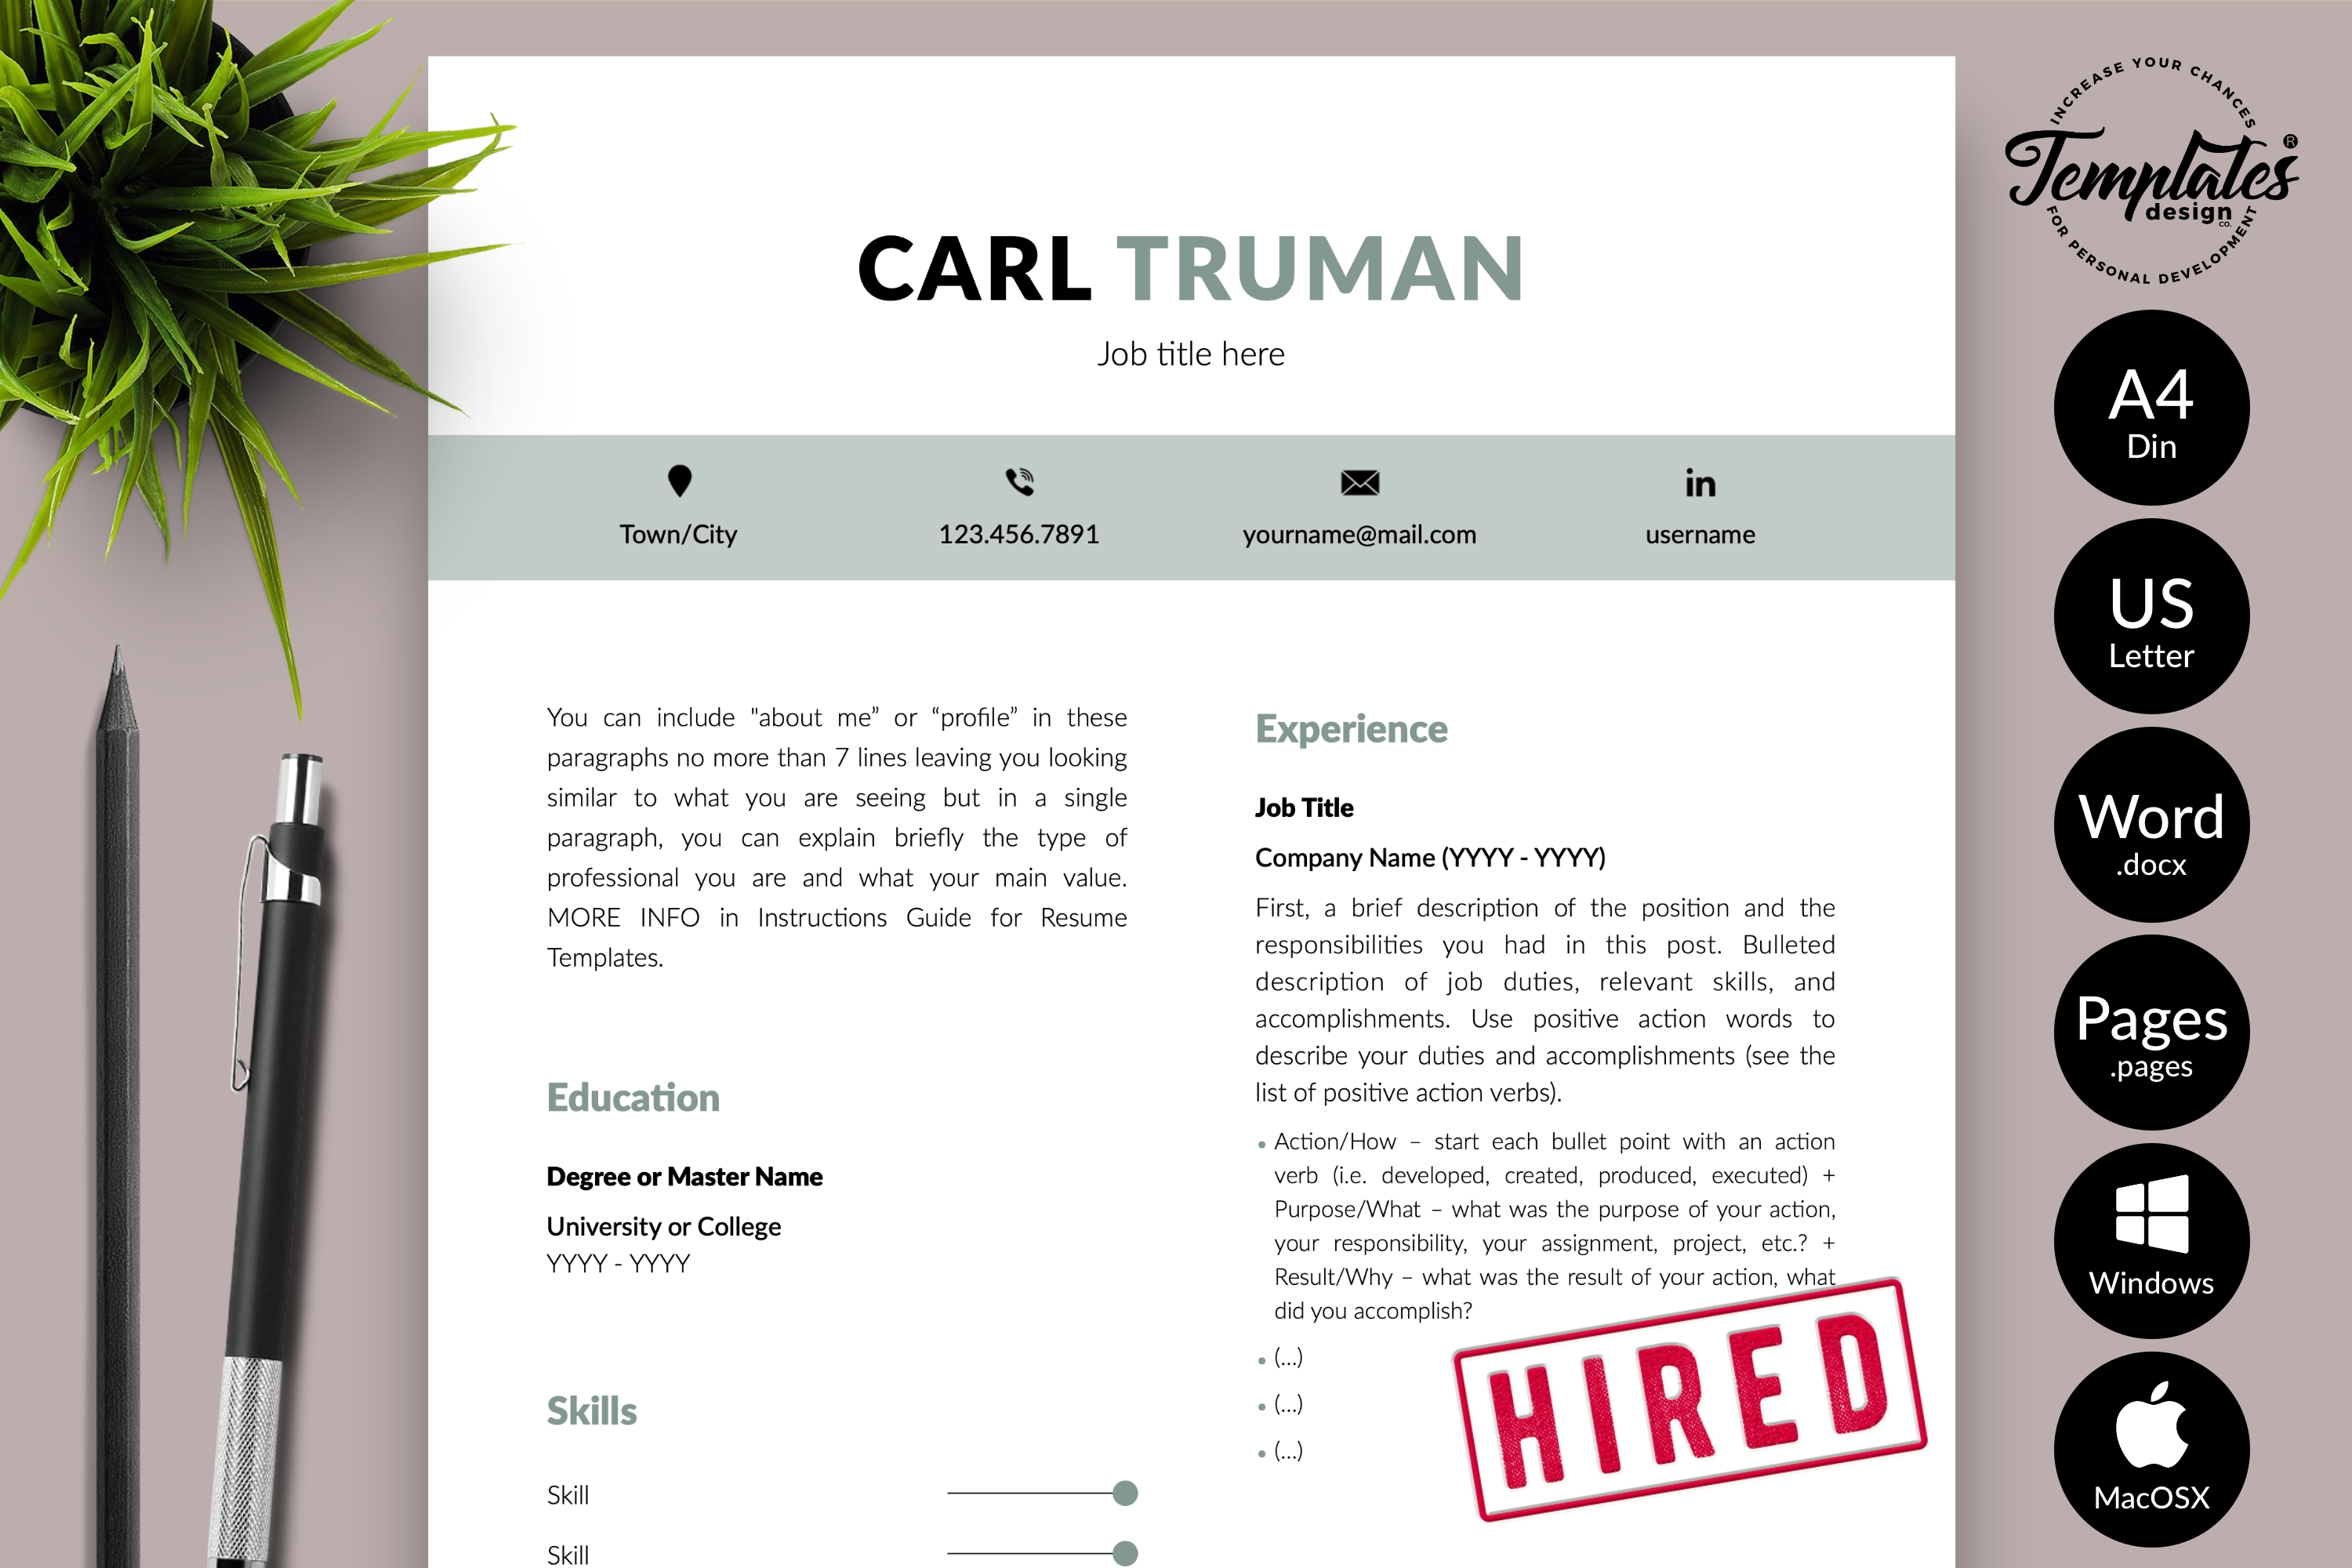 Resume CV Templates, Word & Mac Pages